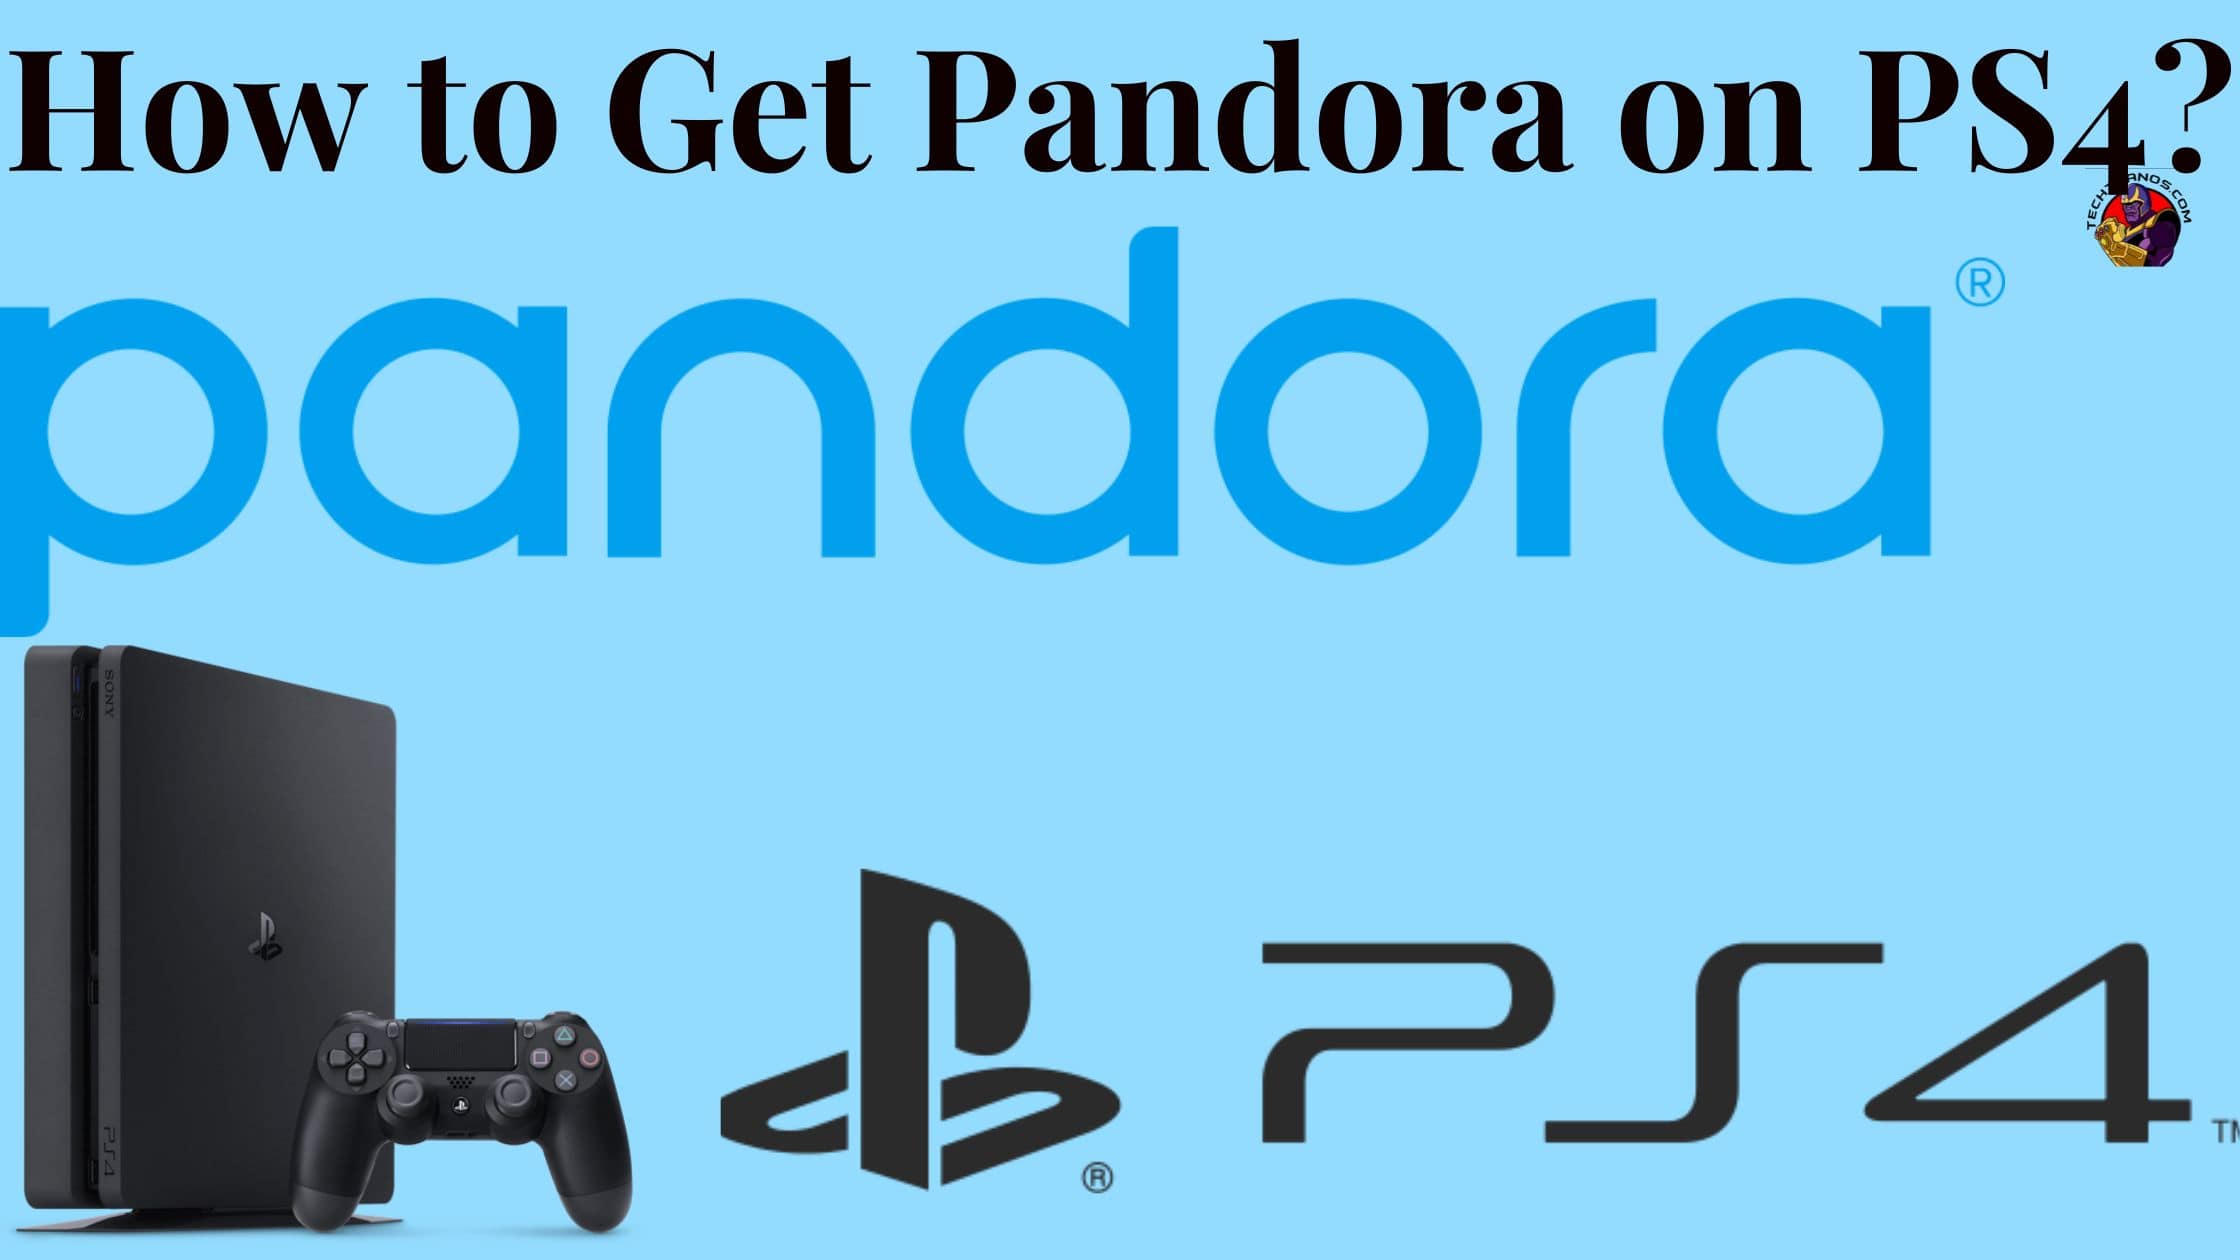 How to Get Pandora on PS4